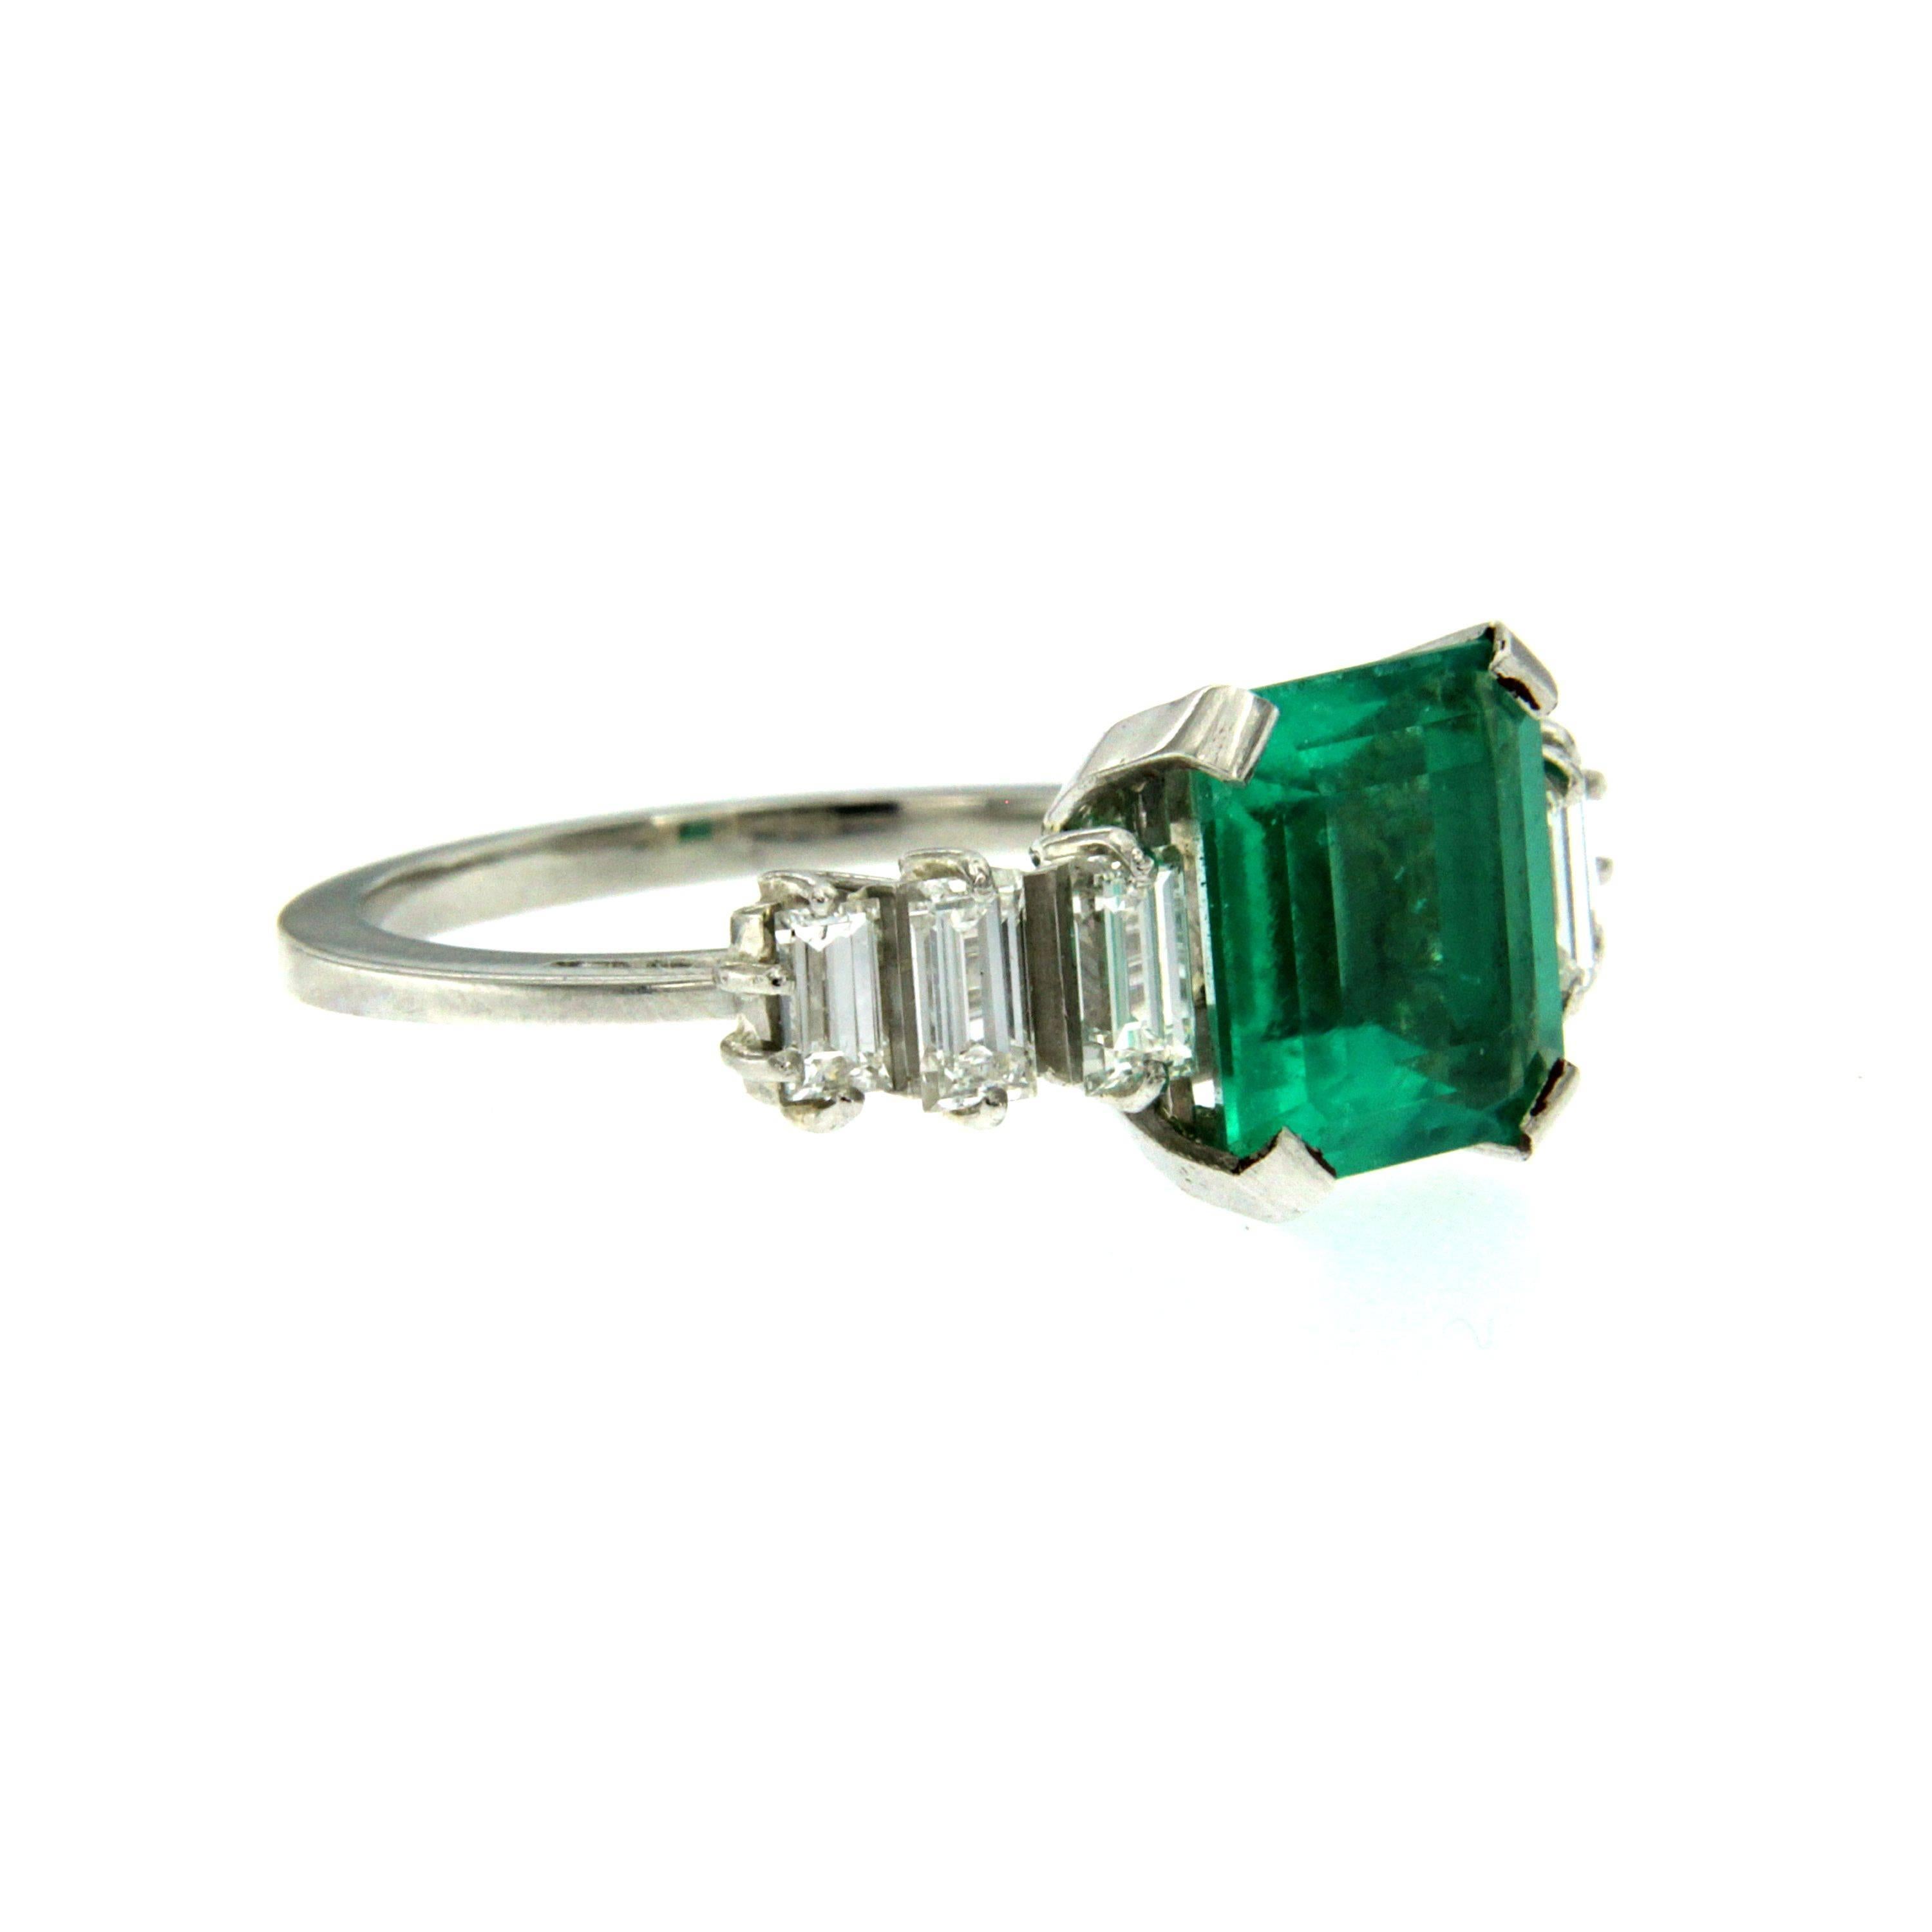 An exquisite engagement ring set in Platinum featuring a stunning 3.25 ct Emerald-cut Colombian Emerald. Flanked on each side are baguette cut diamonds totaling 1.01 carats graded G color Vvs Clarity. 

CONDITION: Pre-Owned - Excellent
METAL: